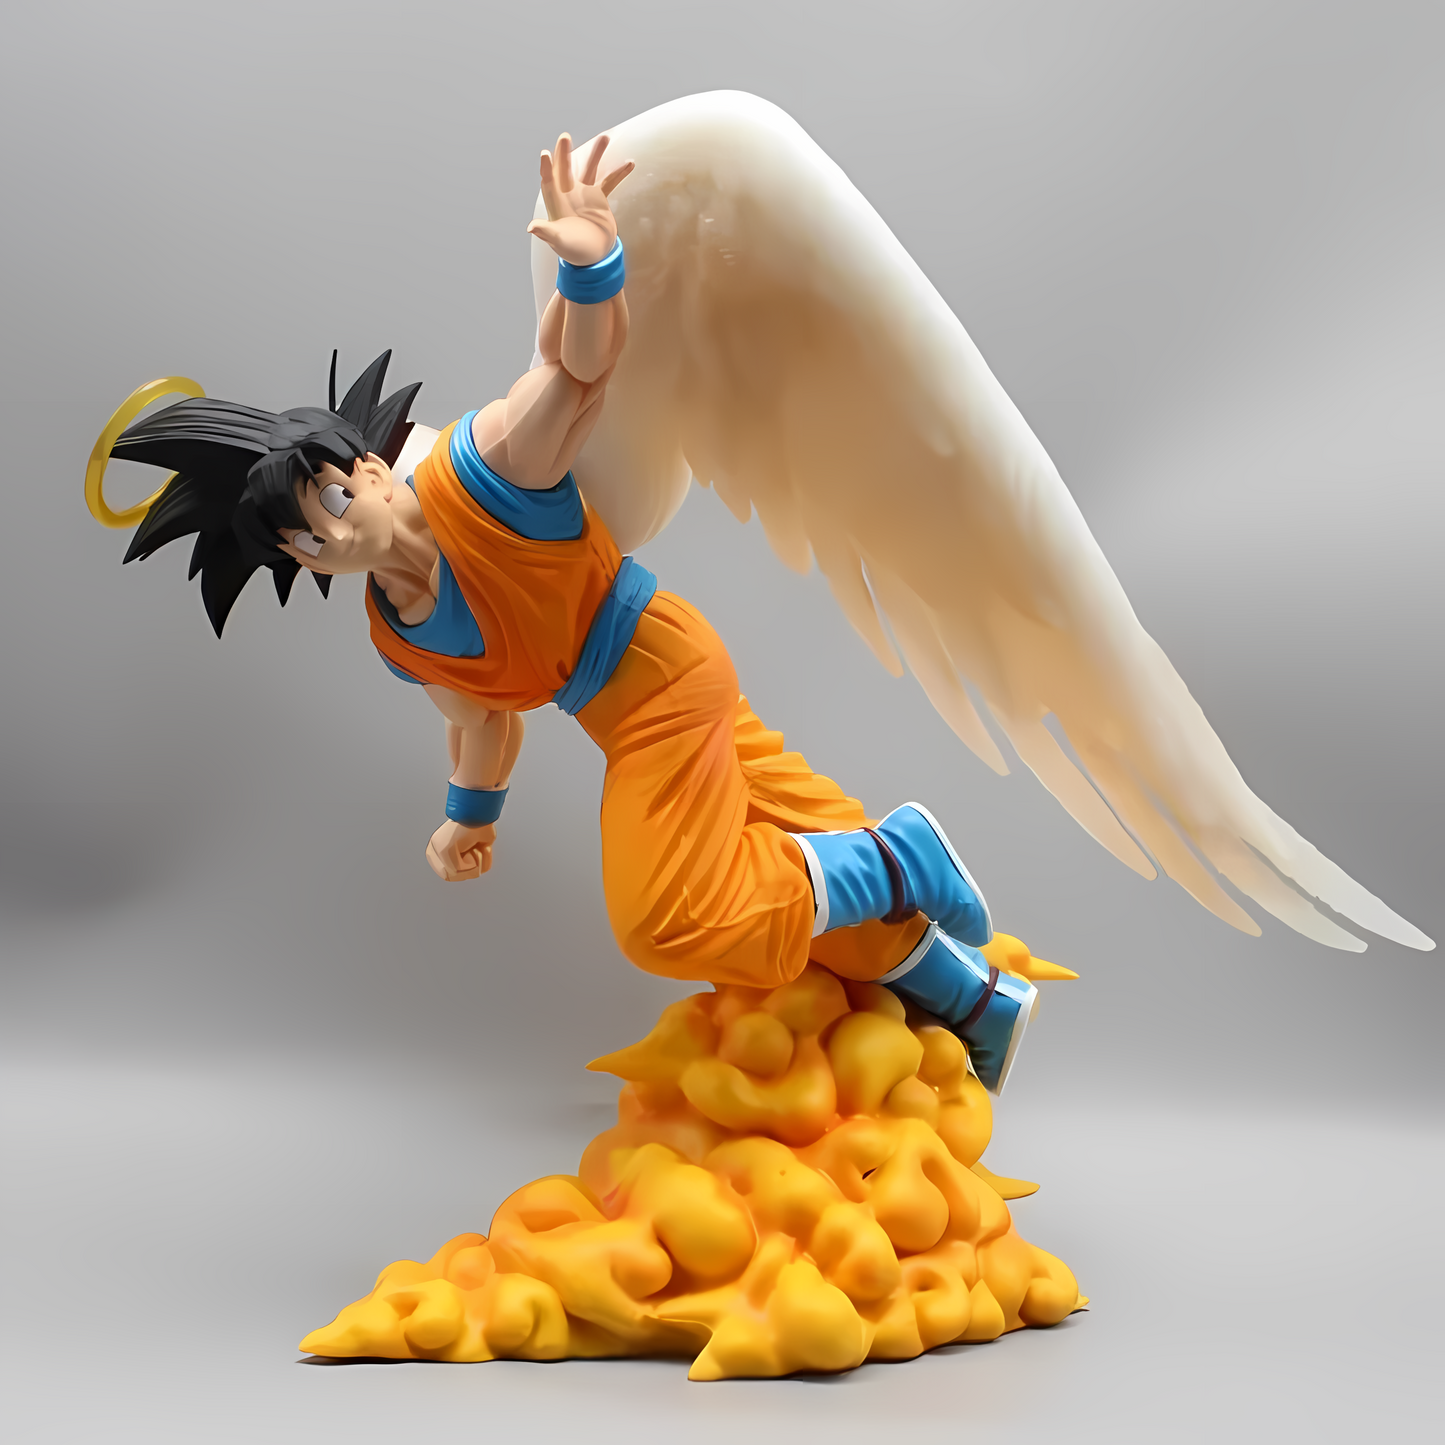 The 'Raising from Heaven Goku' collectible figure is a unique portrayal of Goku from Dragon Ball, kneeling on a soft cloud base, with a serene expression and one hand reaching skyward. He features large, white, feathered wings and is dressed in his signature orange and blue fighting gi, creating a blend of his warrior essence with a celestial theme.